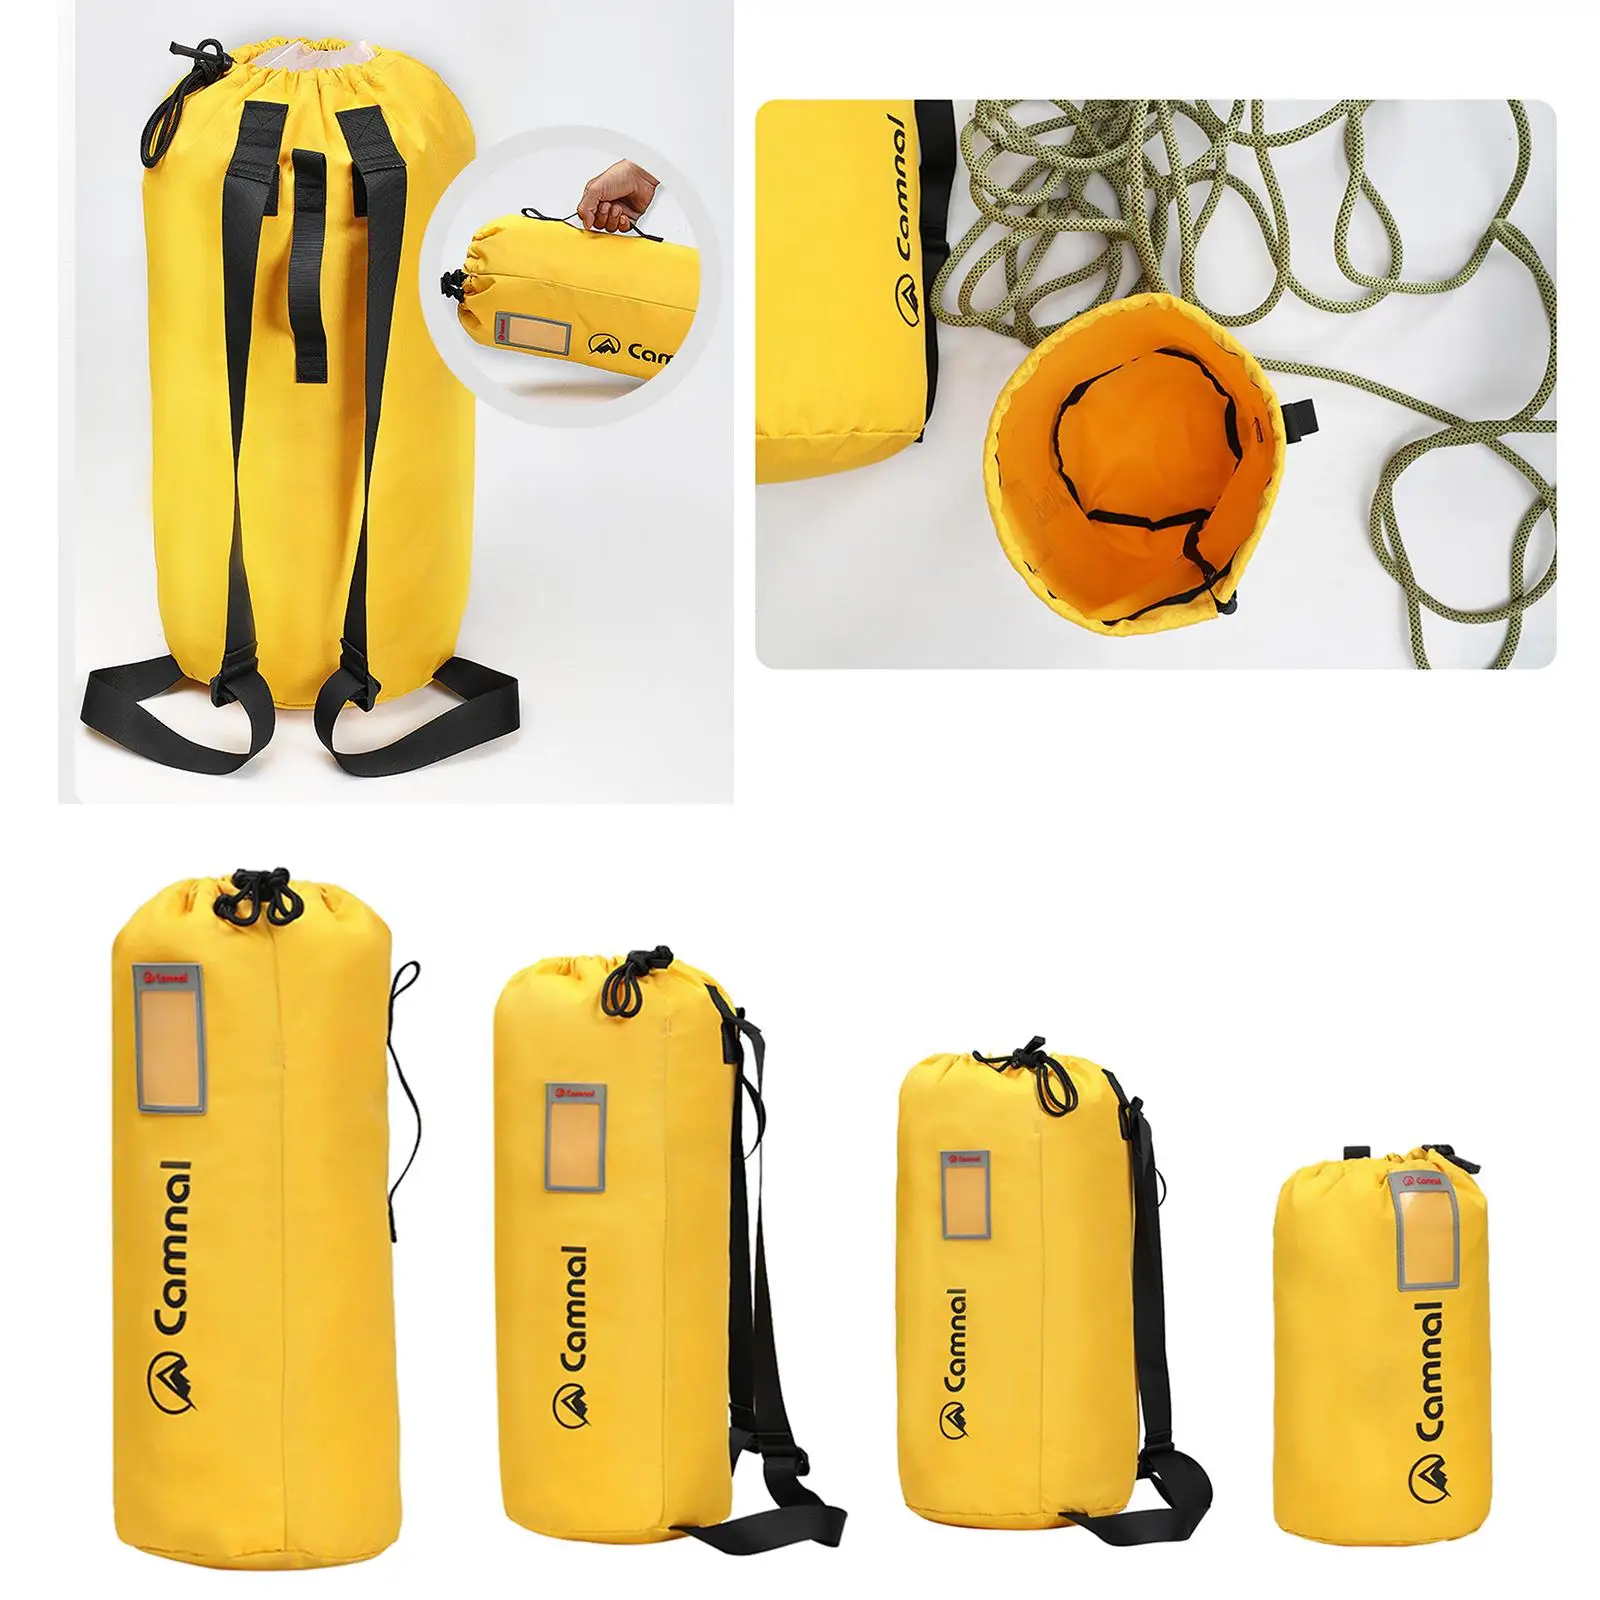 Rock Climbing Rope Bag, Waterproof Folding Shoulder Backpack Buckles And Straps, Climbing Rope Storage Bag,